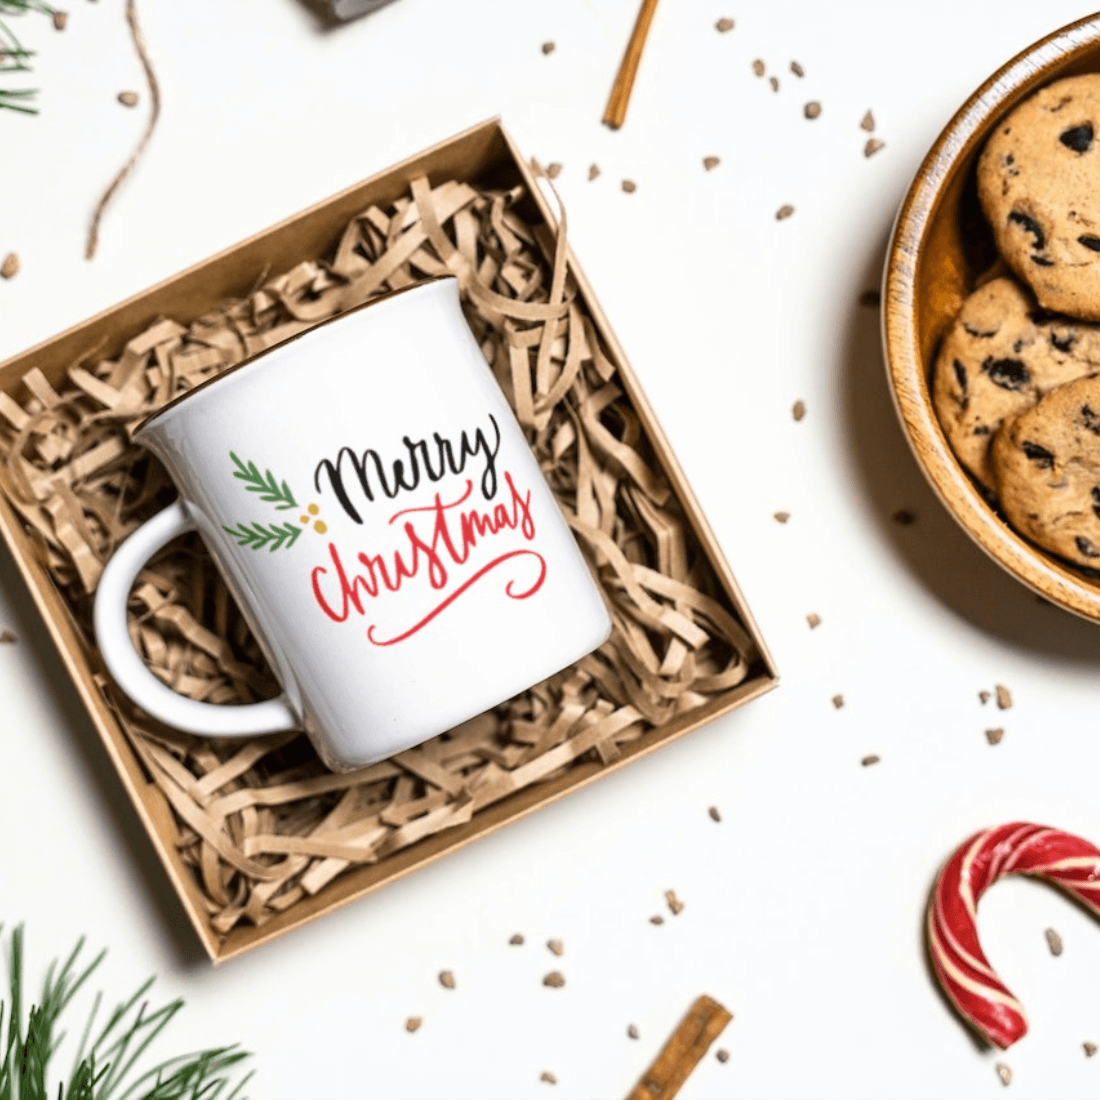 Big white tea cup with minimalistic Christmas graphic.